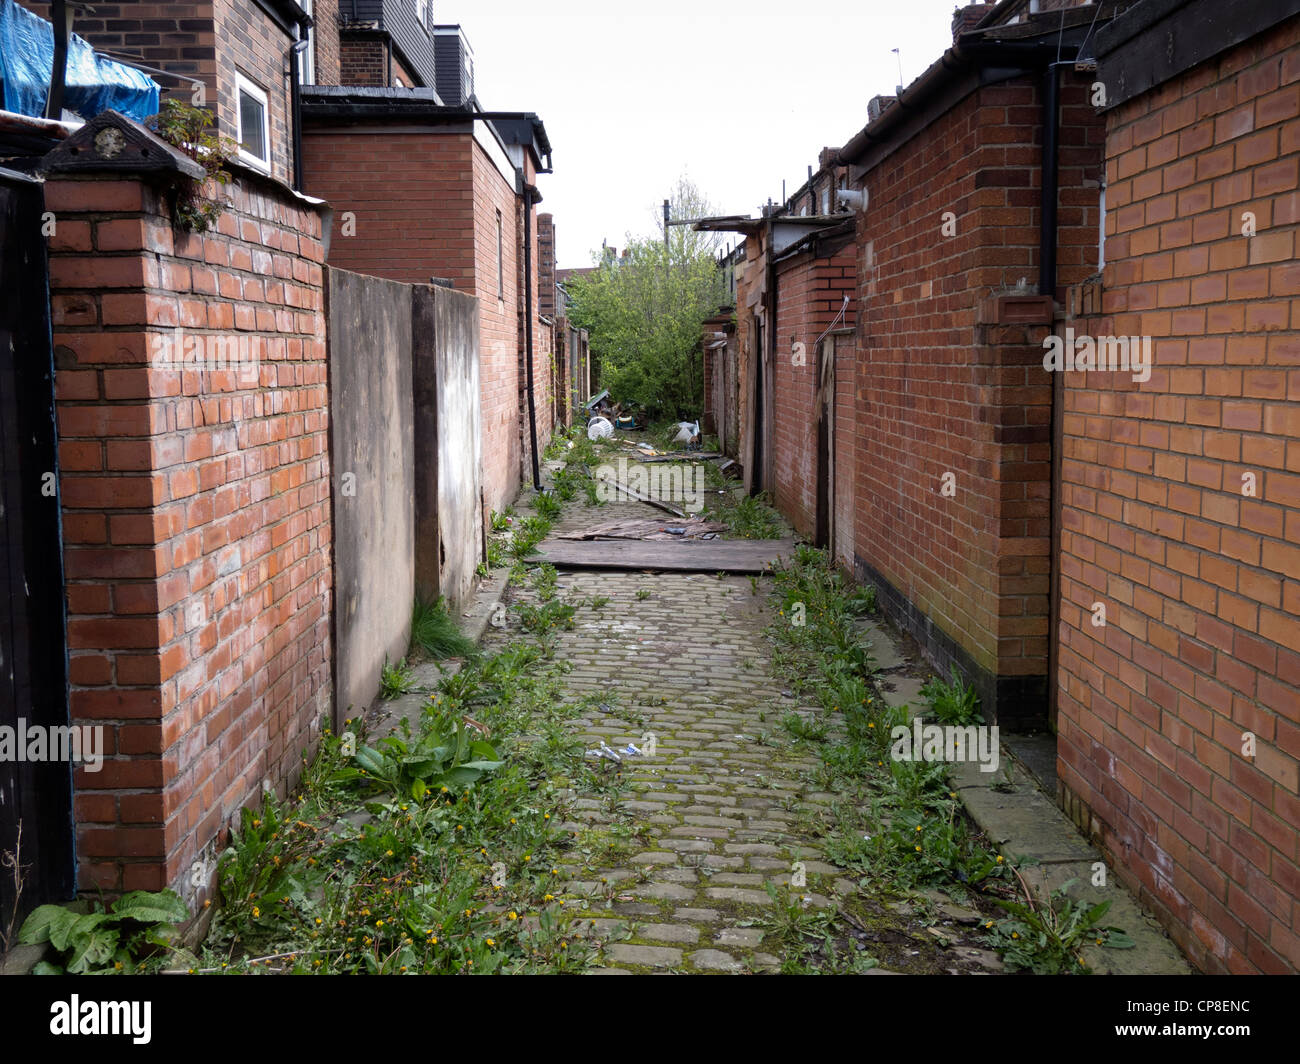 England, Salford, traditional 'ginnel' or back alleyway in early 19th century terraced housing. Stock Photo